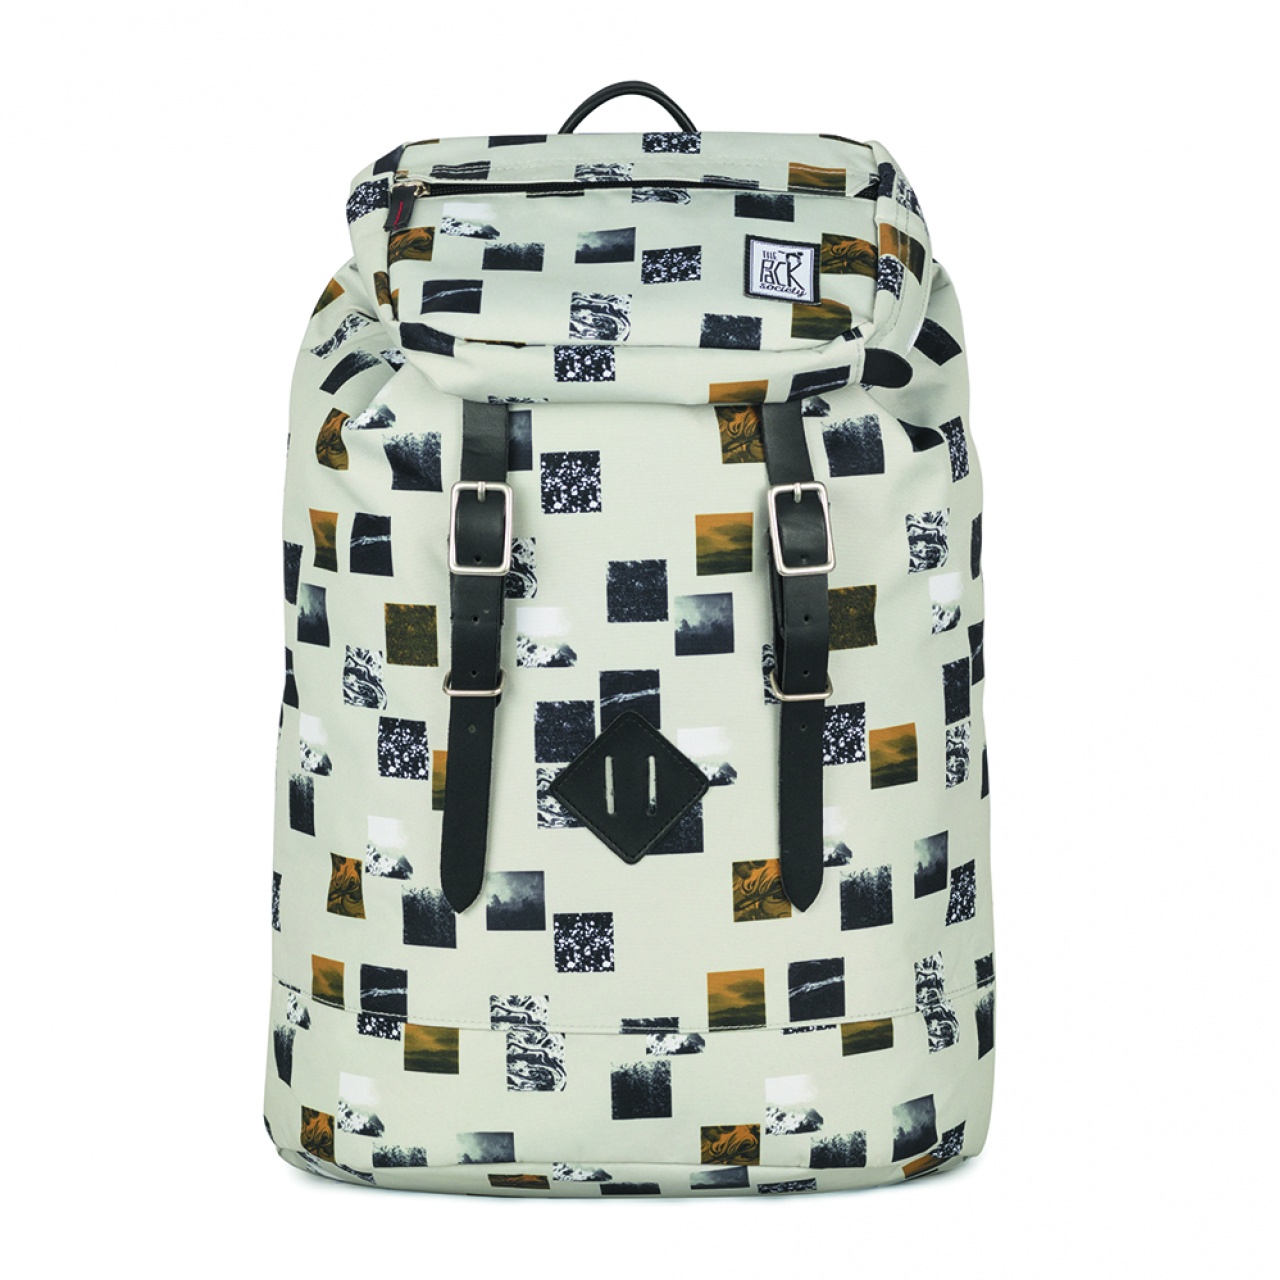 Rucsac mare The Pack Society Beige Blocks